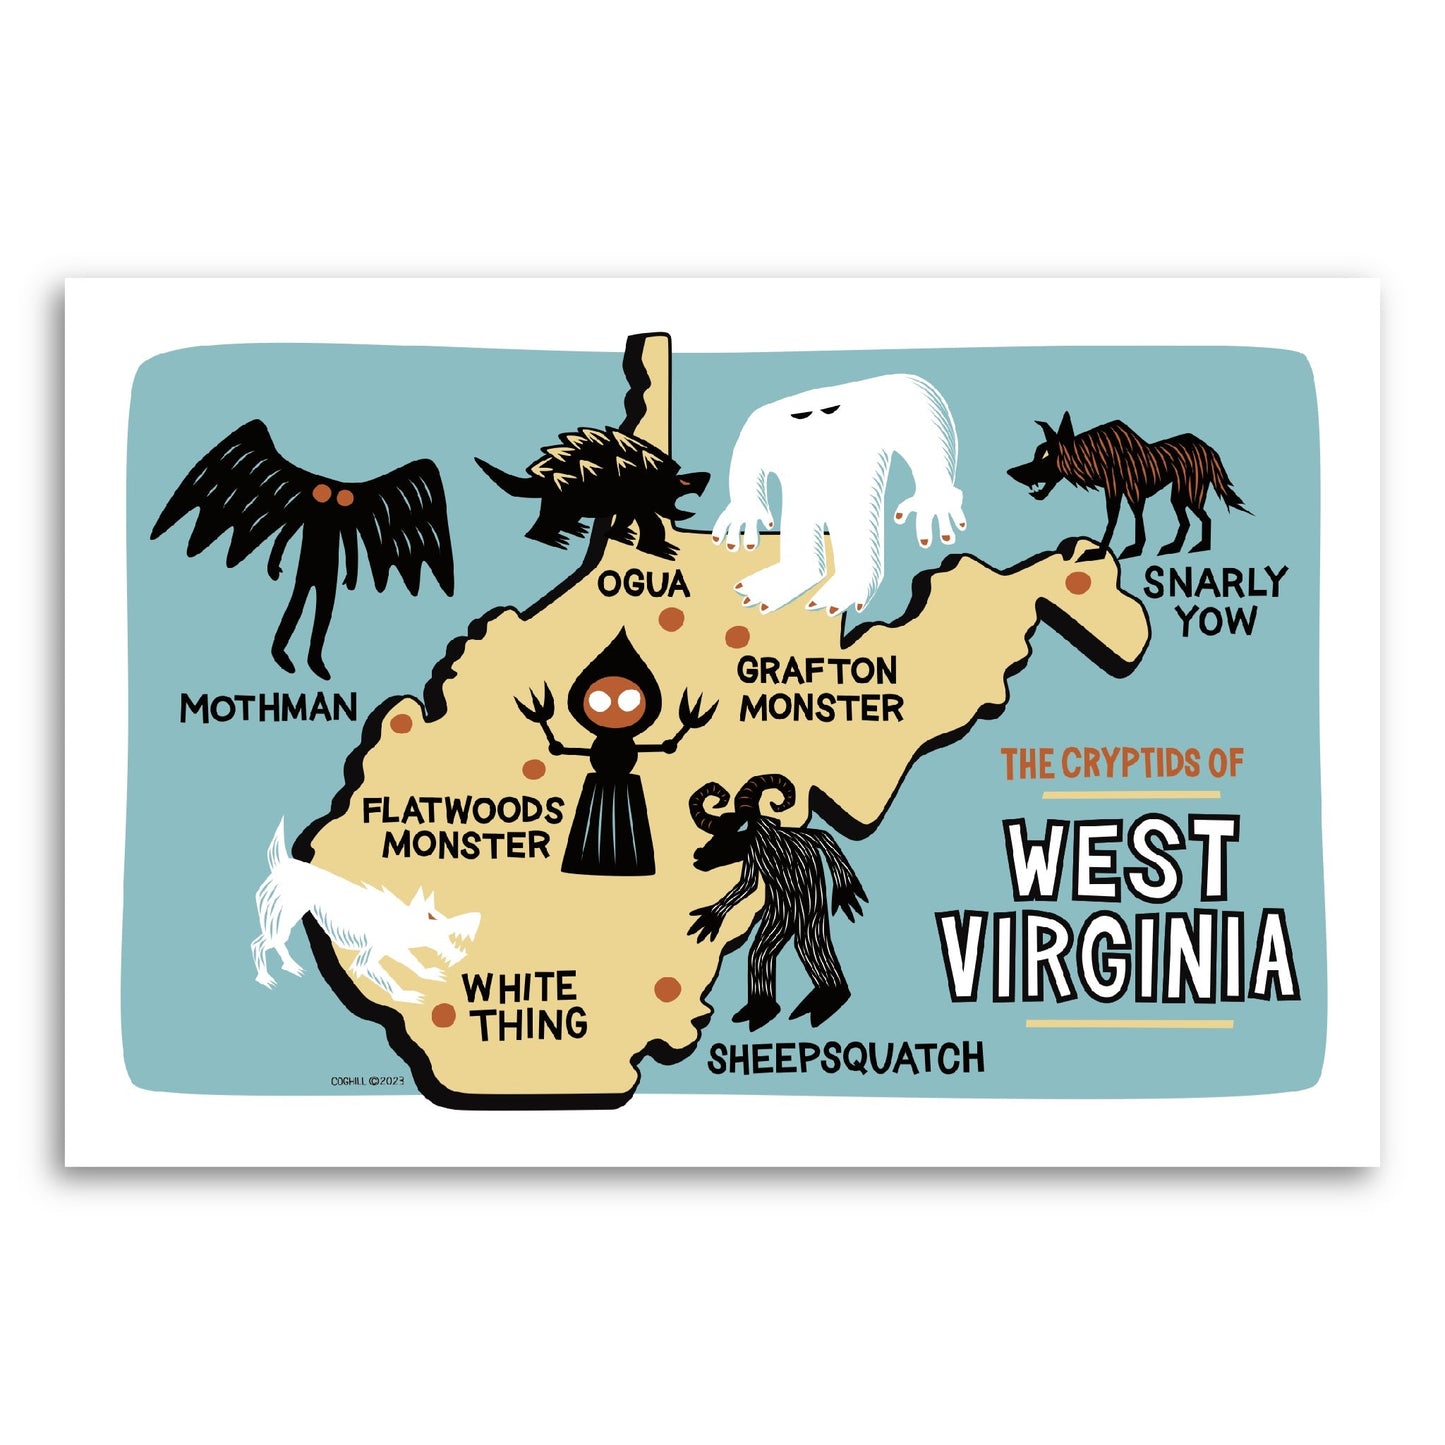 West Virginia illustrated art map featuring cryptids of the state. 